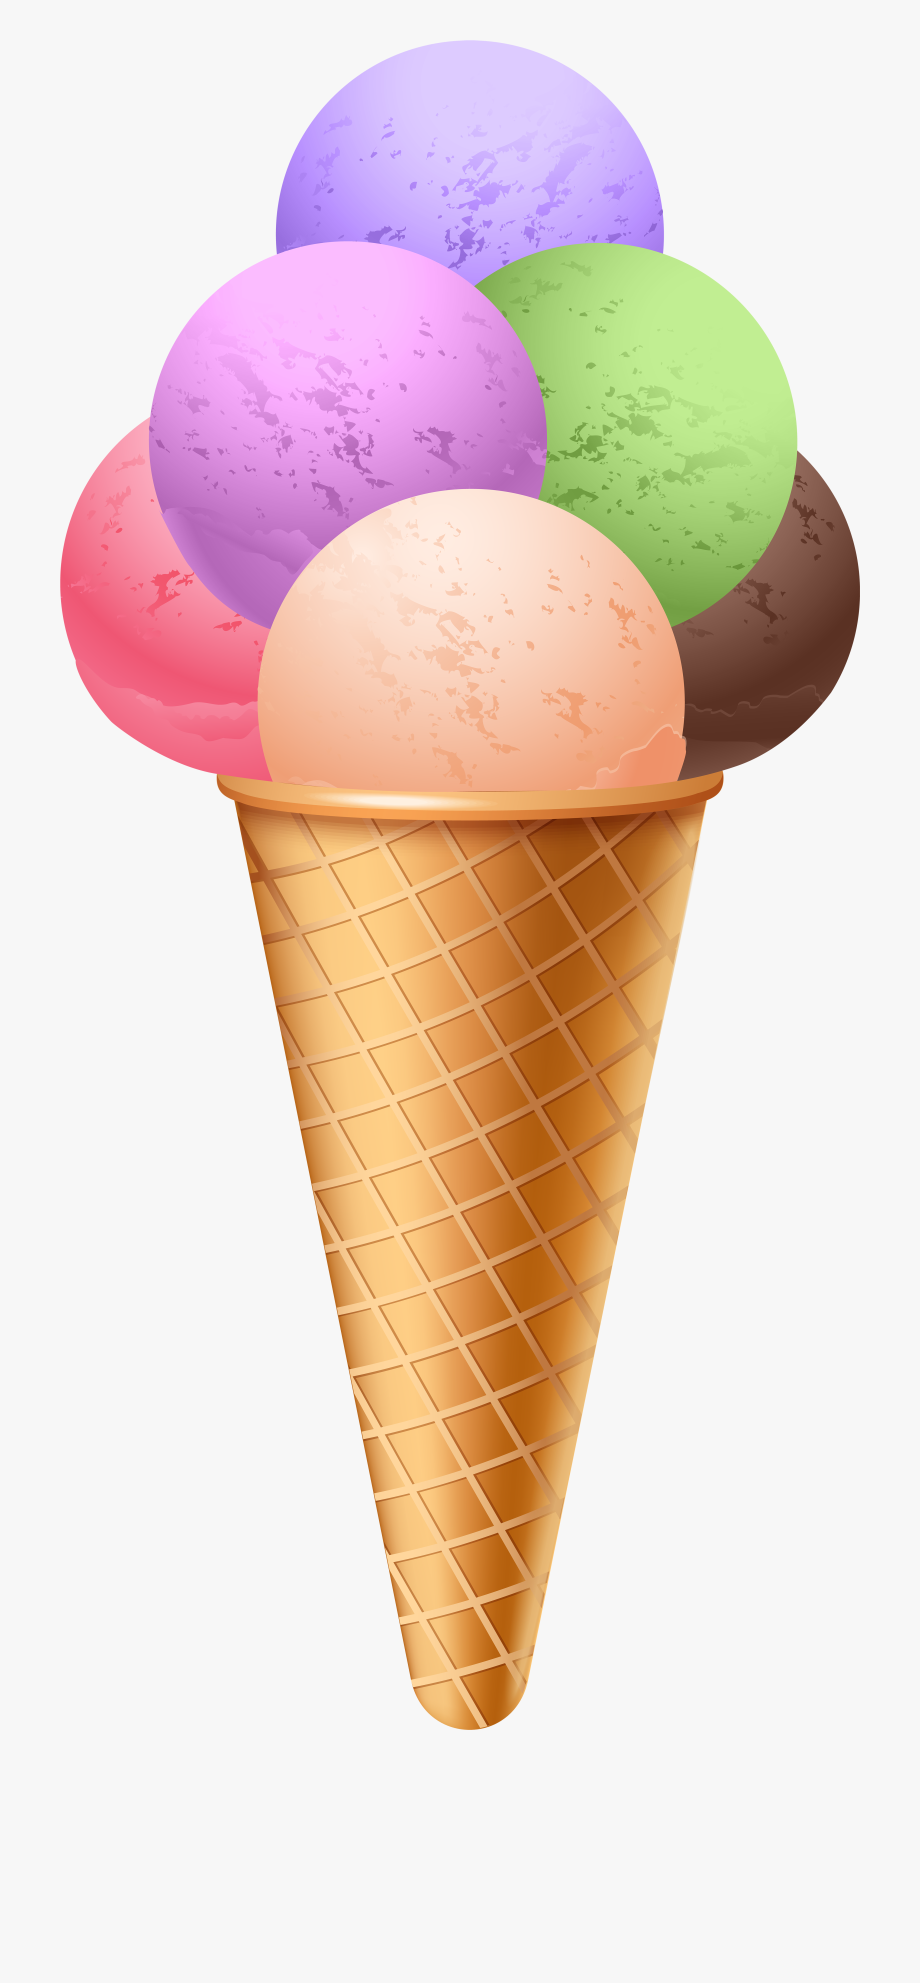 download high quality ice cream cone clipart transparent